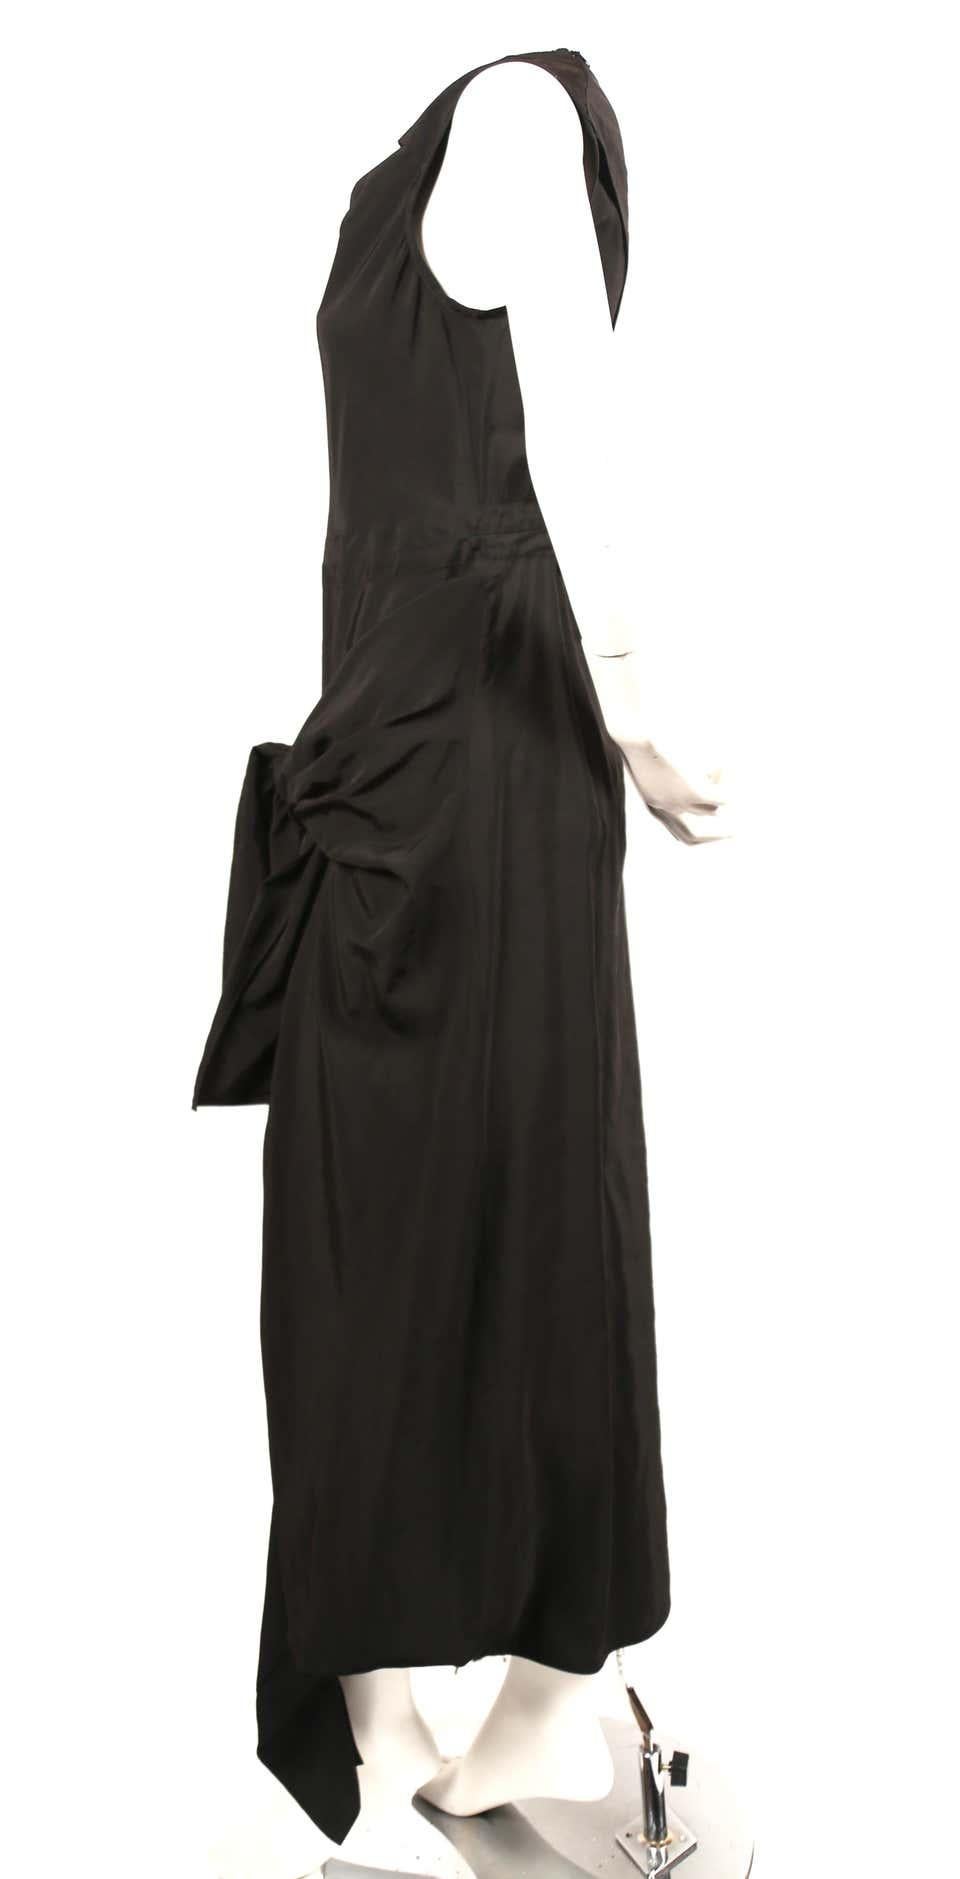 Jet-black dress with twisted neckline, ties at hips and cut out at back designed by Phoebe Philo for Celine dating to resort of 2016. Best fits a French size 40. Approximate measurements: shoulder 15